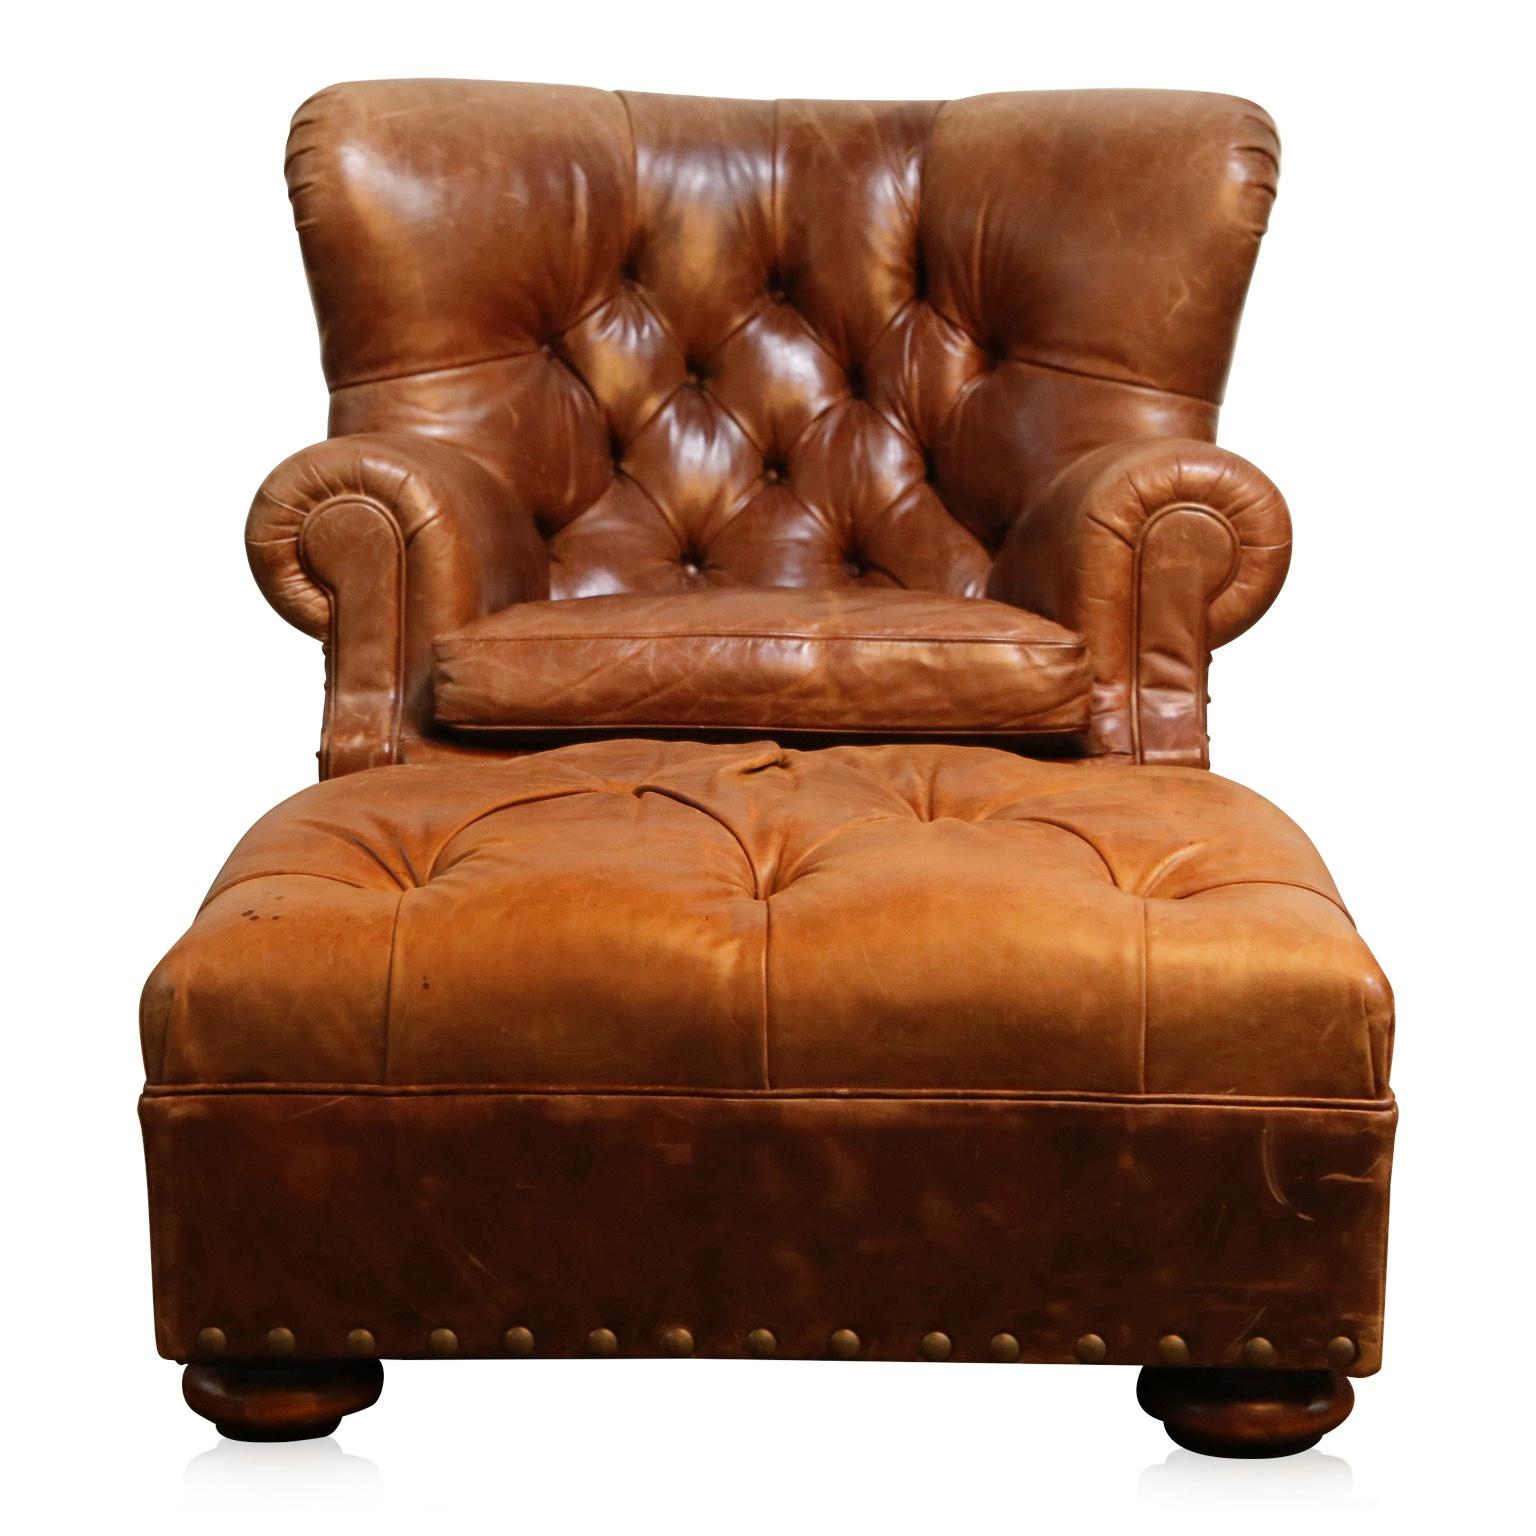 This Ralph Lauren labelled writer's chair and ottoman has such incredible leather, very thick and quality hides were used in it's making. The striking large scale wingback silhouette is iconic, many have copied this design but none are as good as